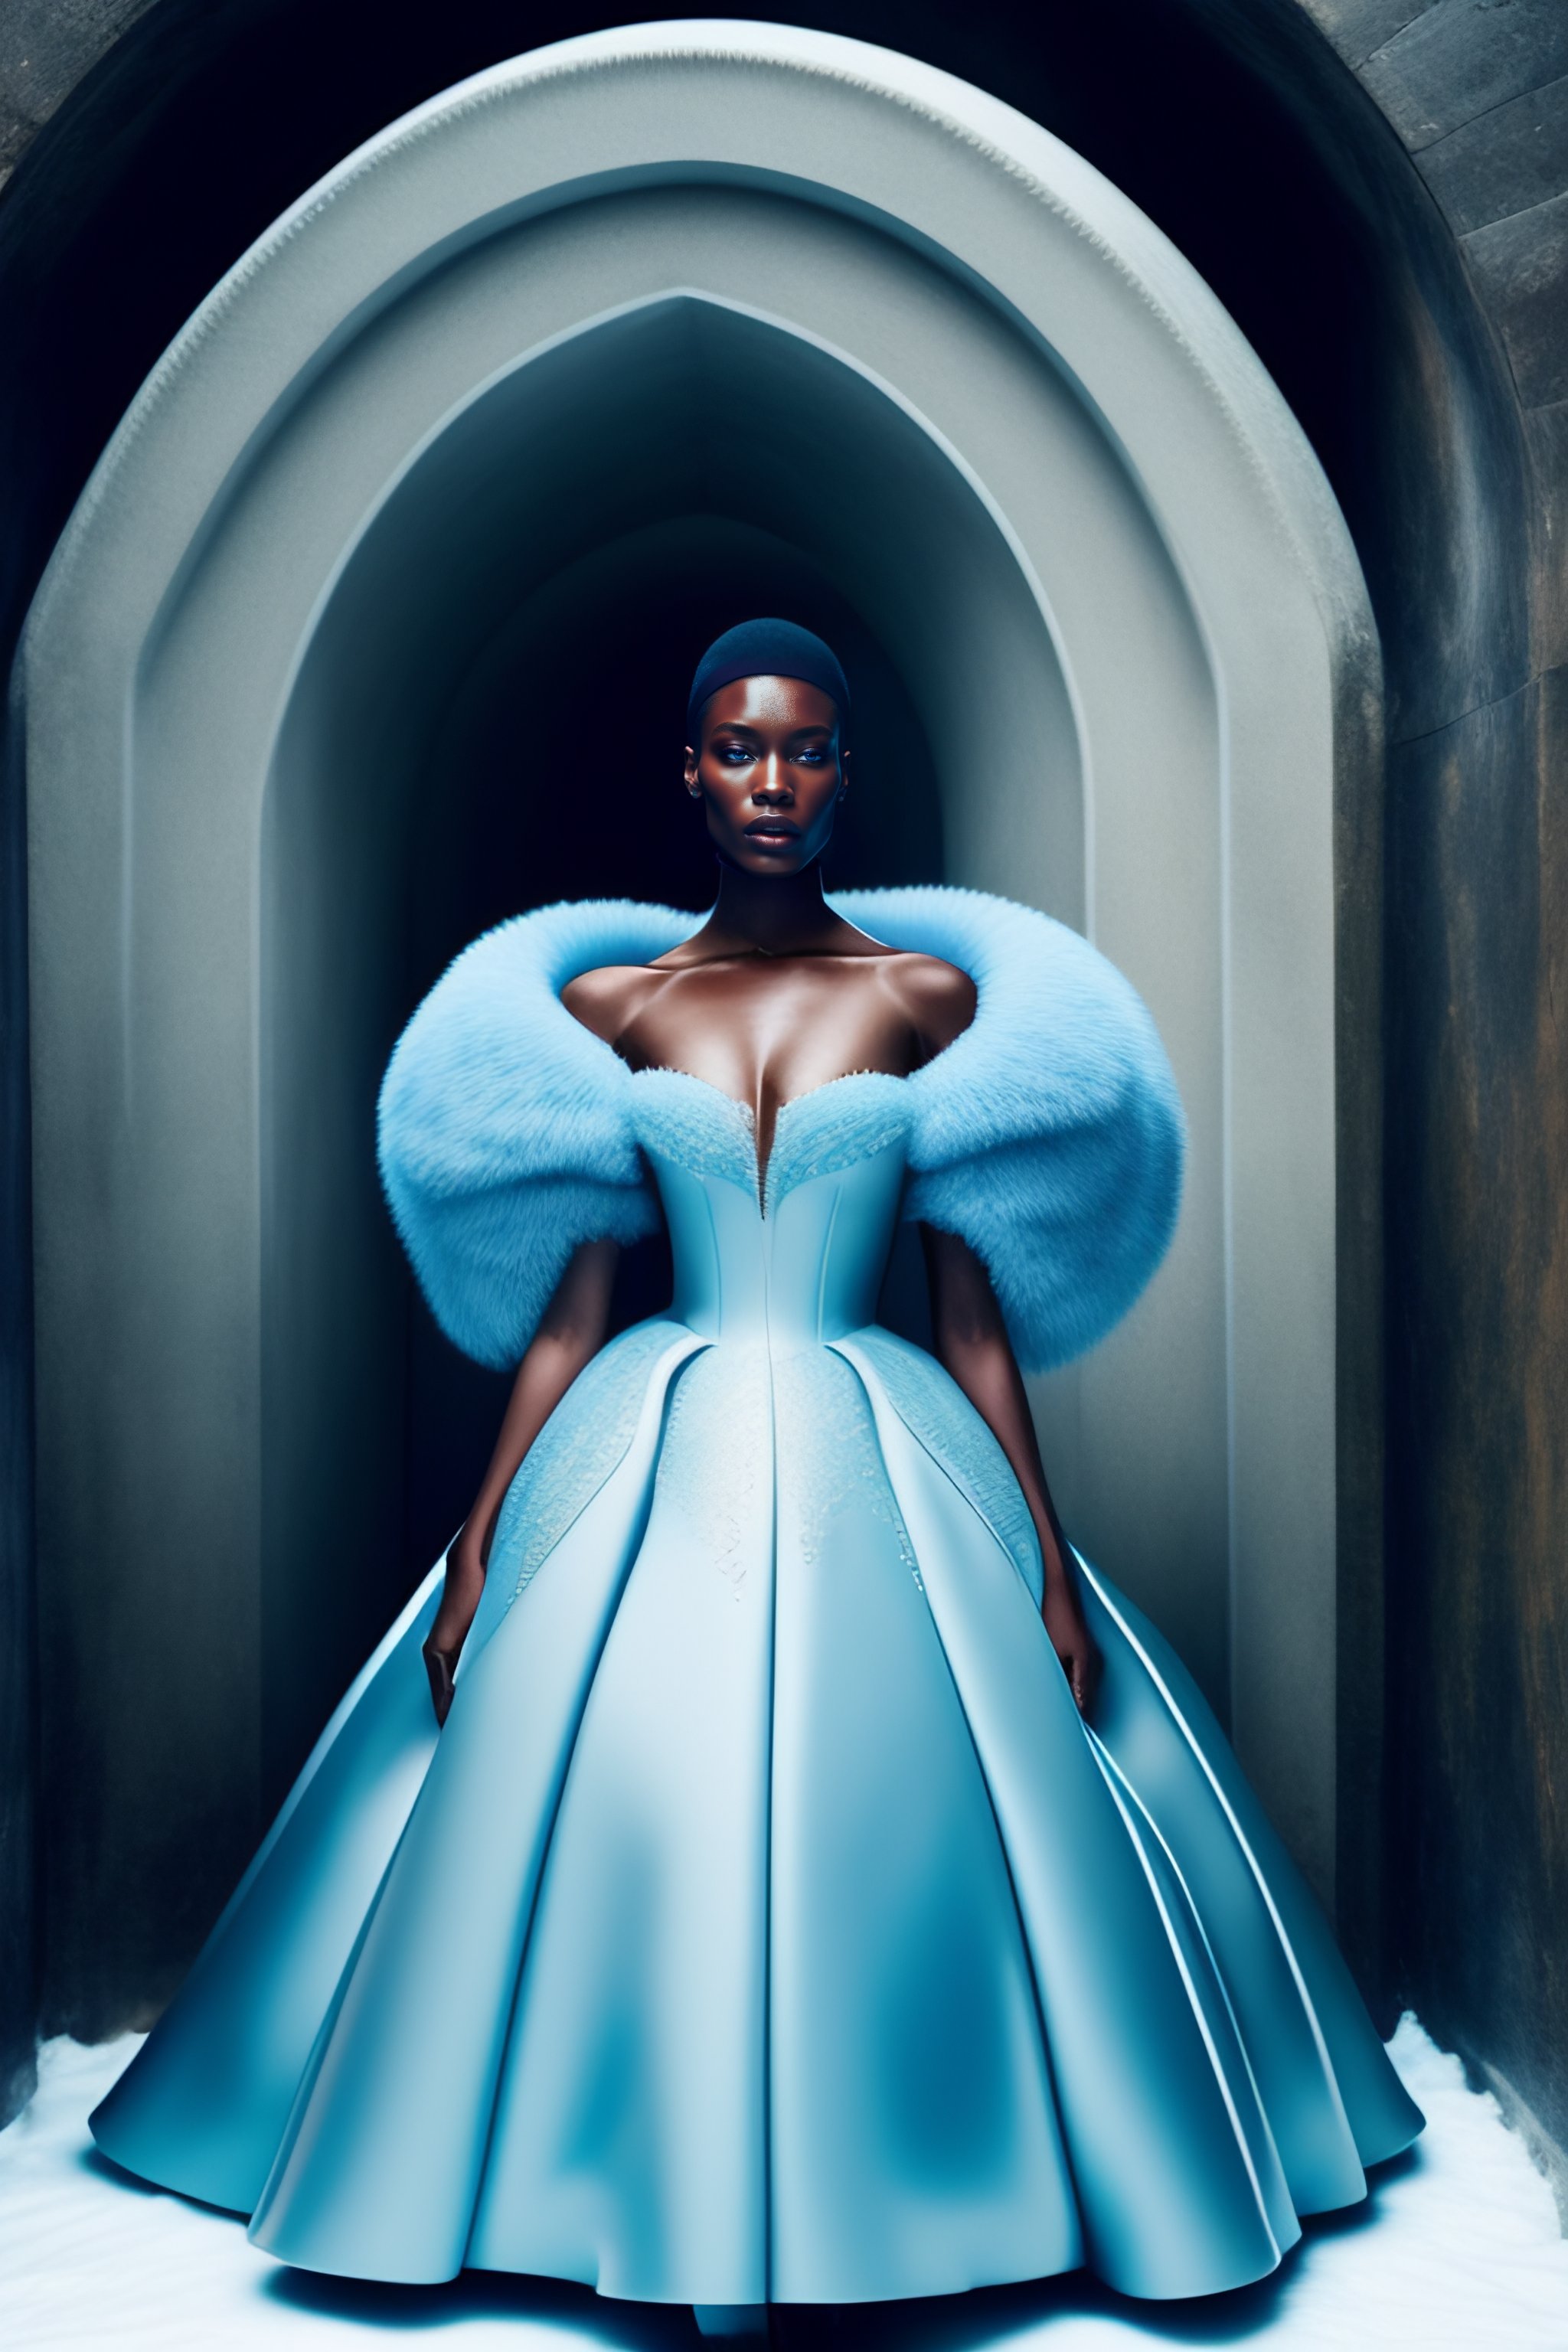 Lexica Vogue Magazine Editorial Fashion Photography Of High Fashion Hooded Figures In Icy Blue